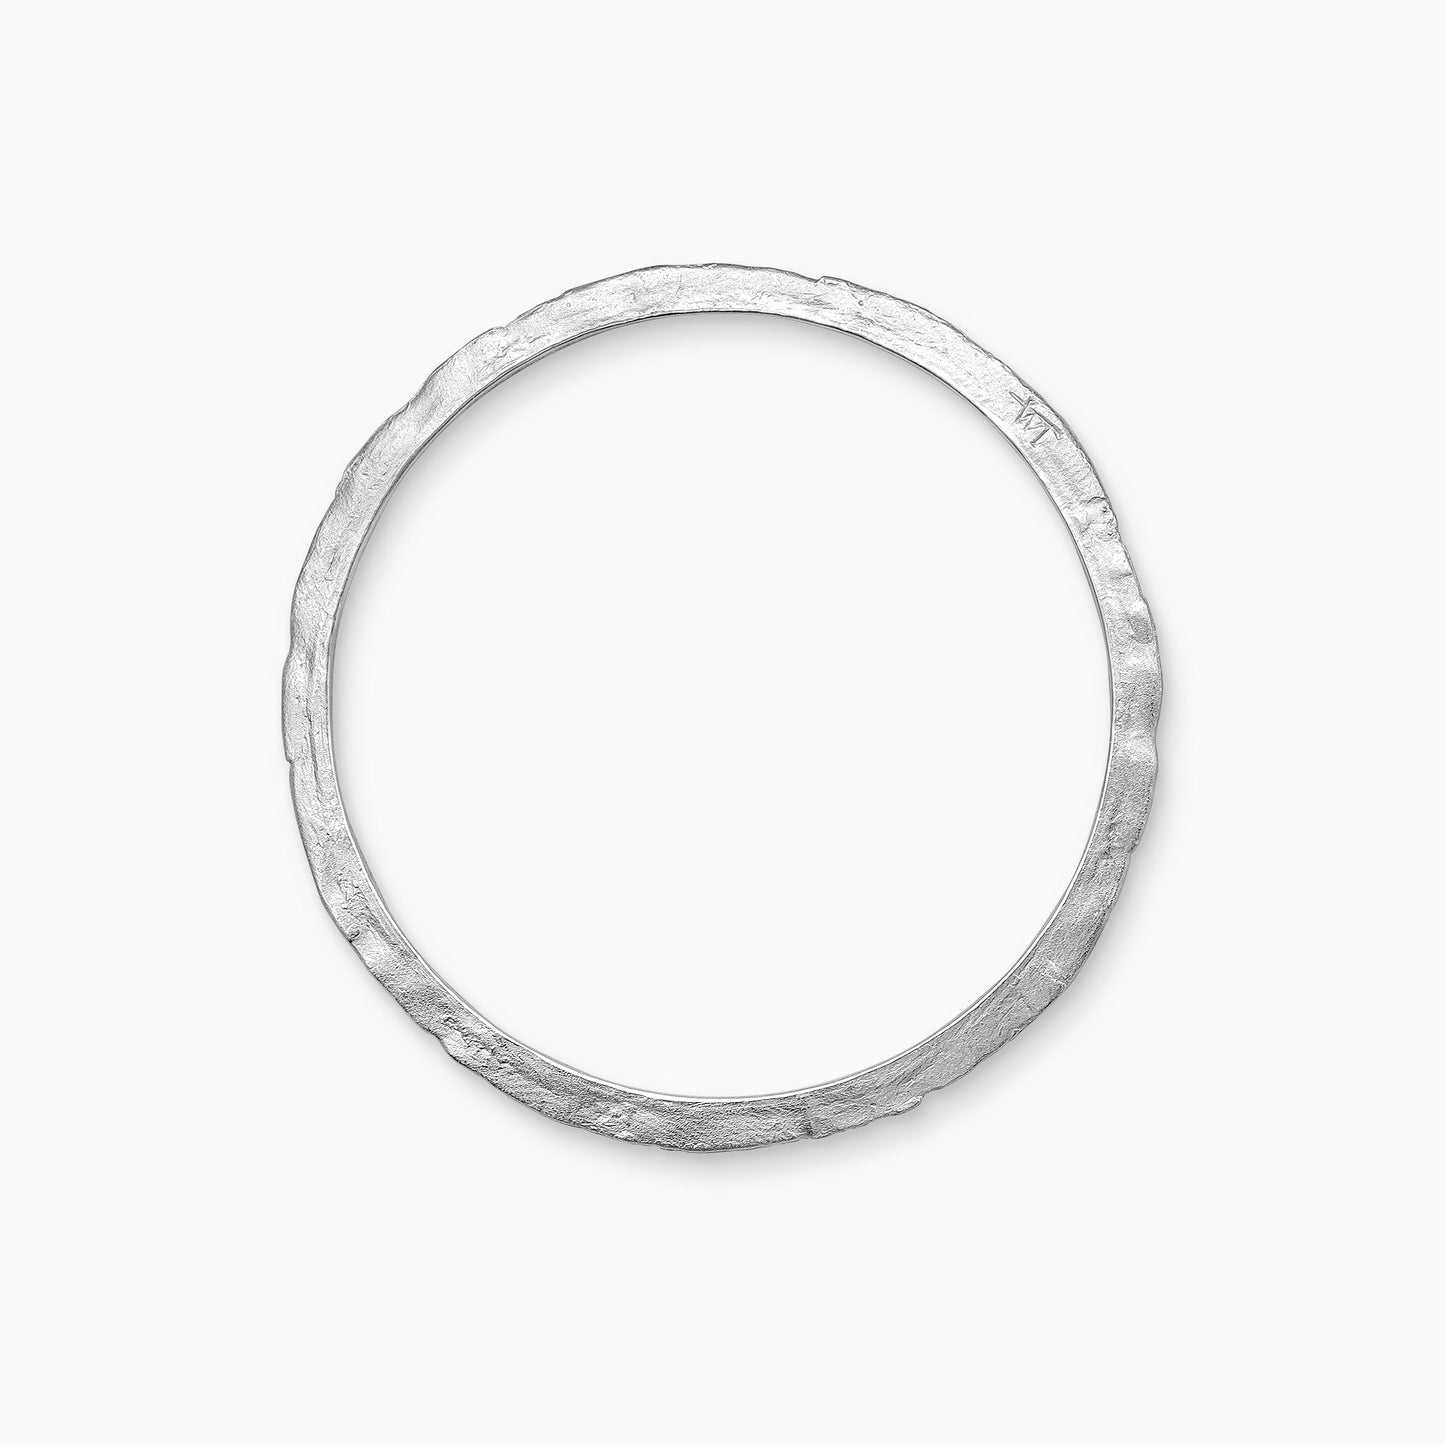 A recycled Silver bangle, textured and flat with smooth inside edge and contoured outer edge. Inside diameter 63mm. Outside diameter 72mm.